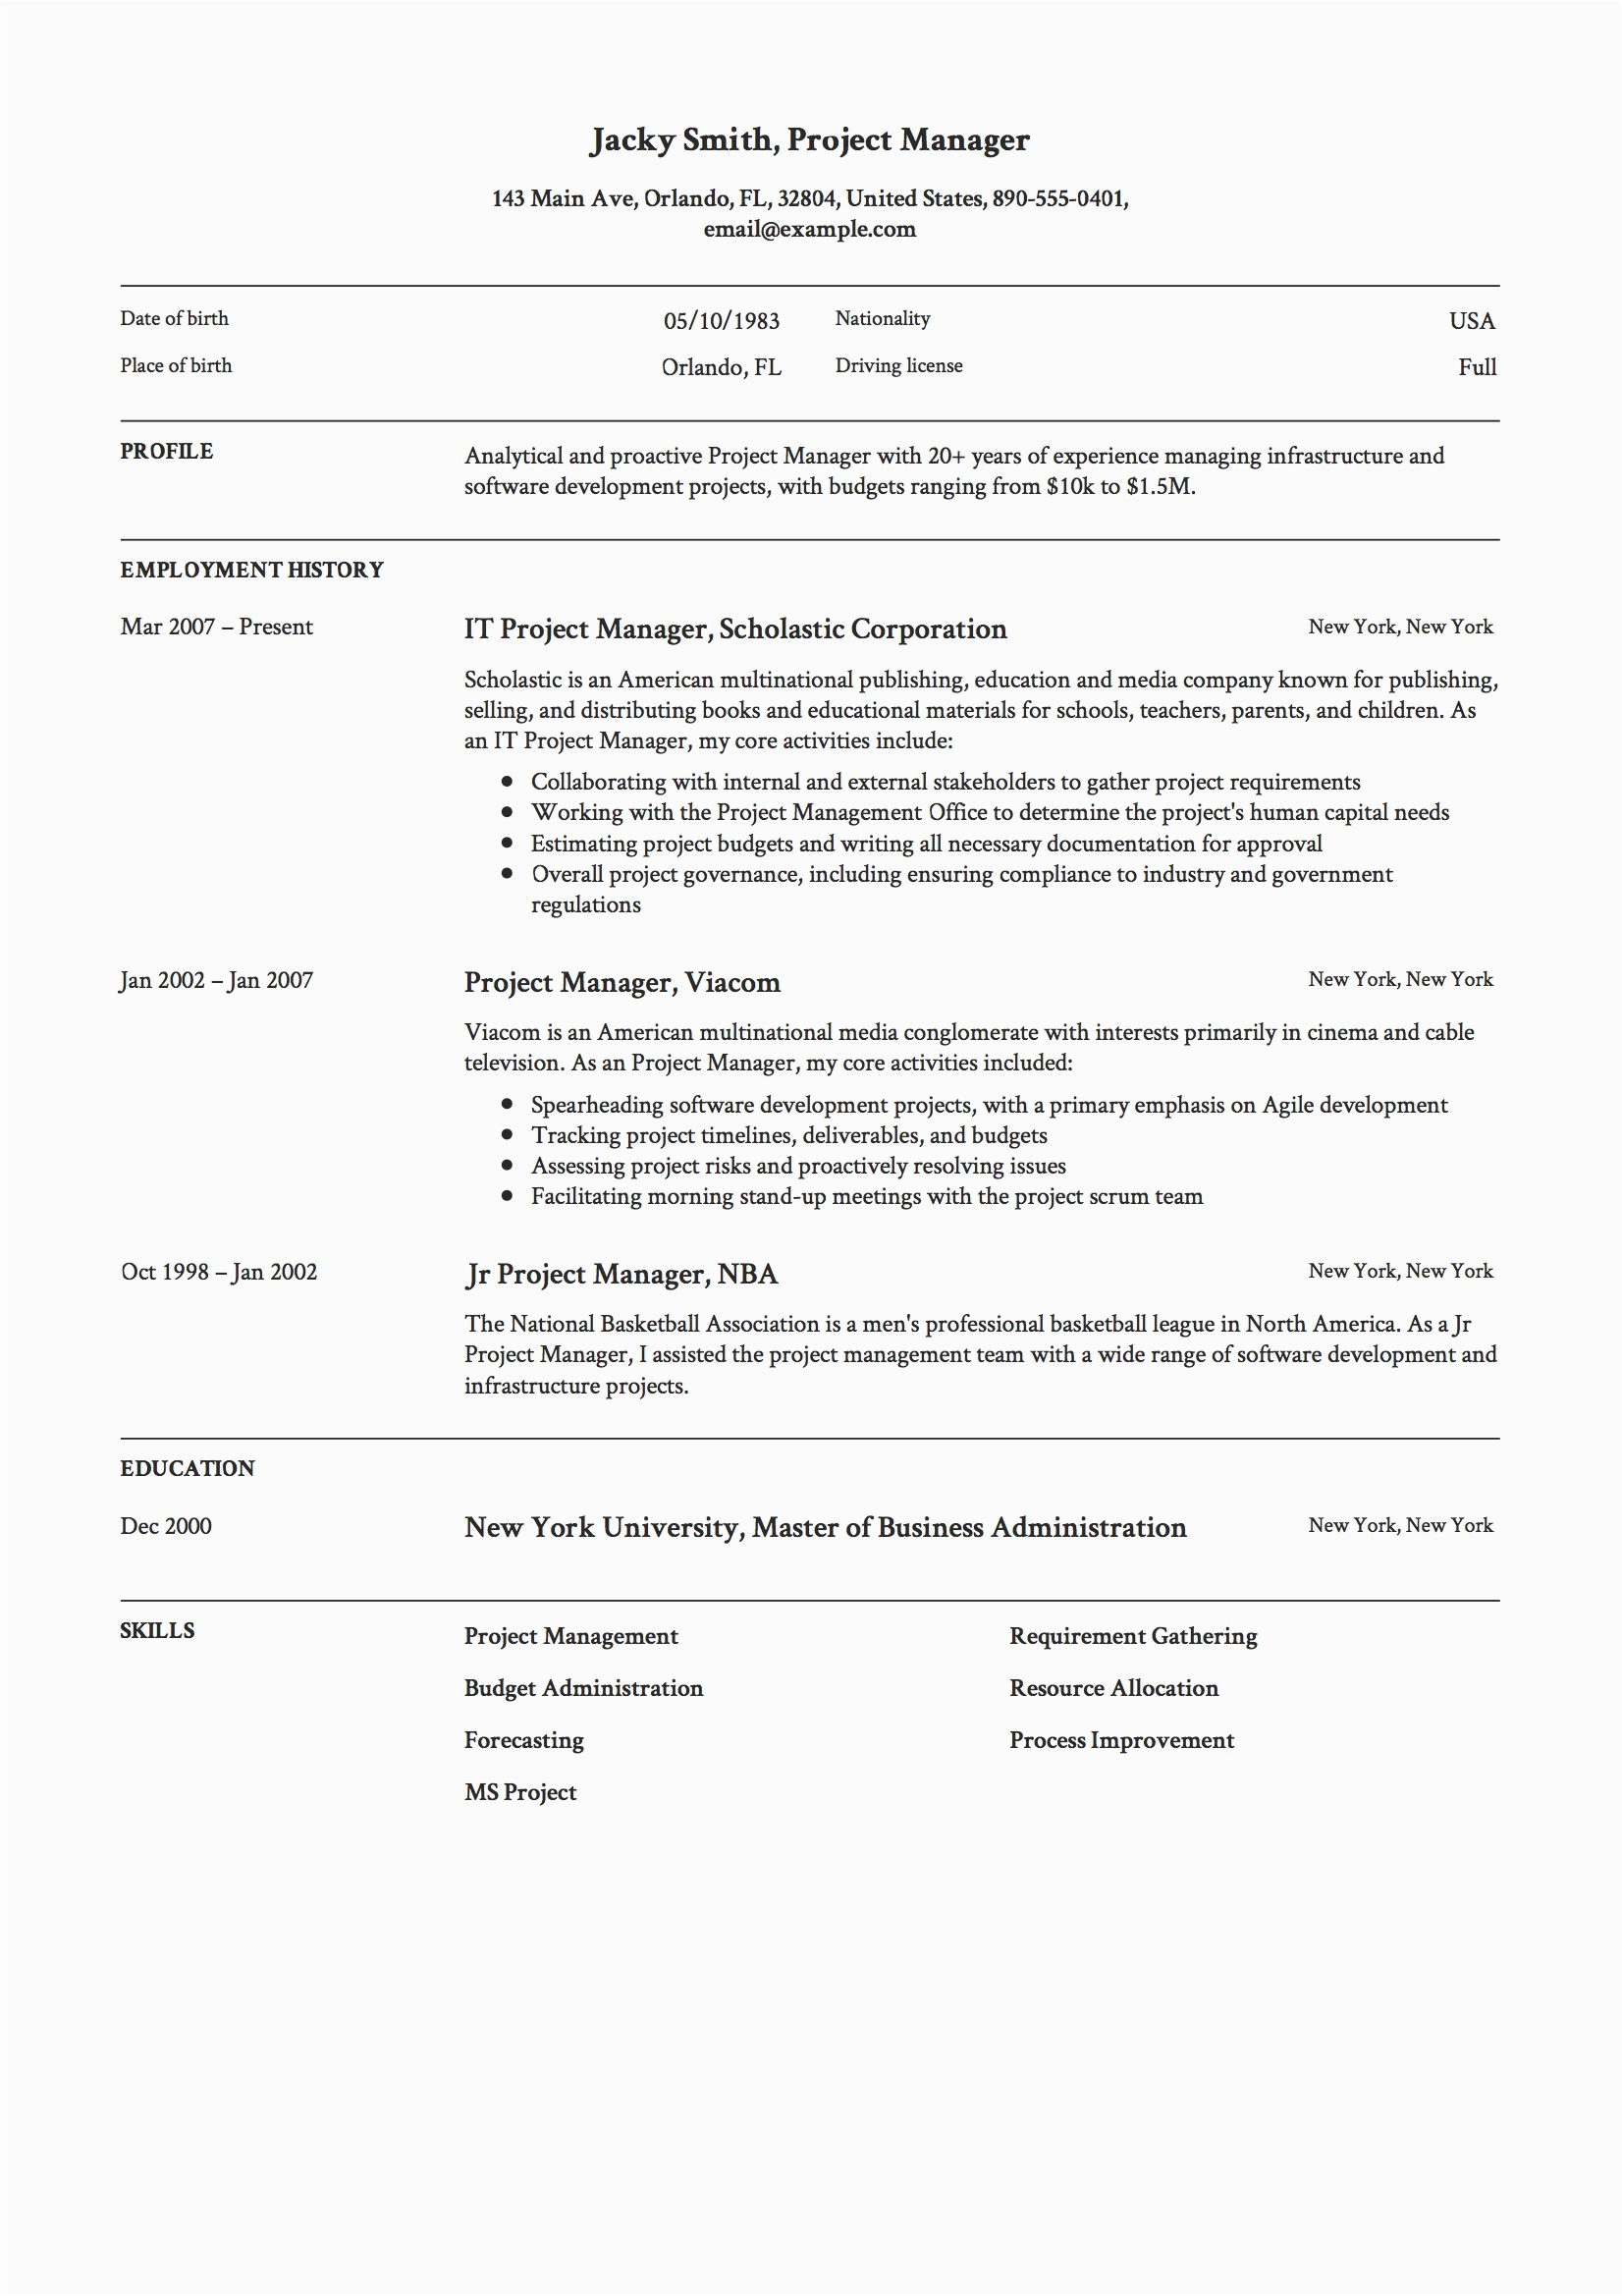 Sample Resume to Managing Projects Worth Millions Project Manager Resume & Full Guide